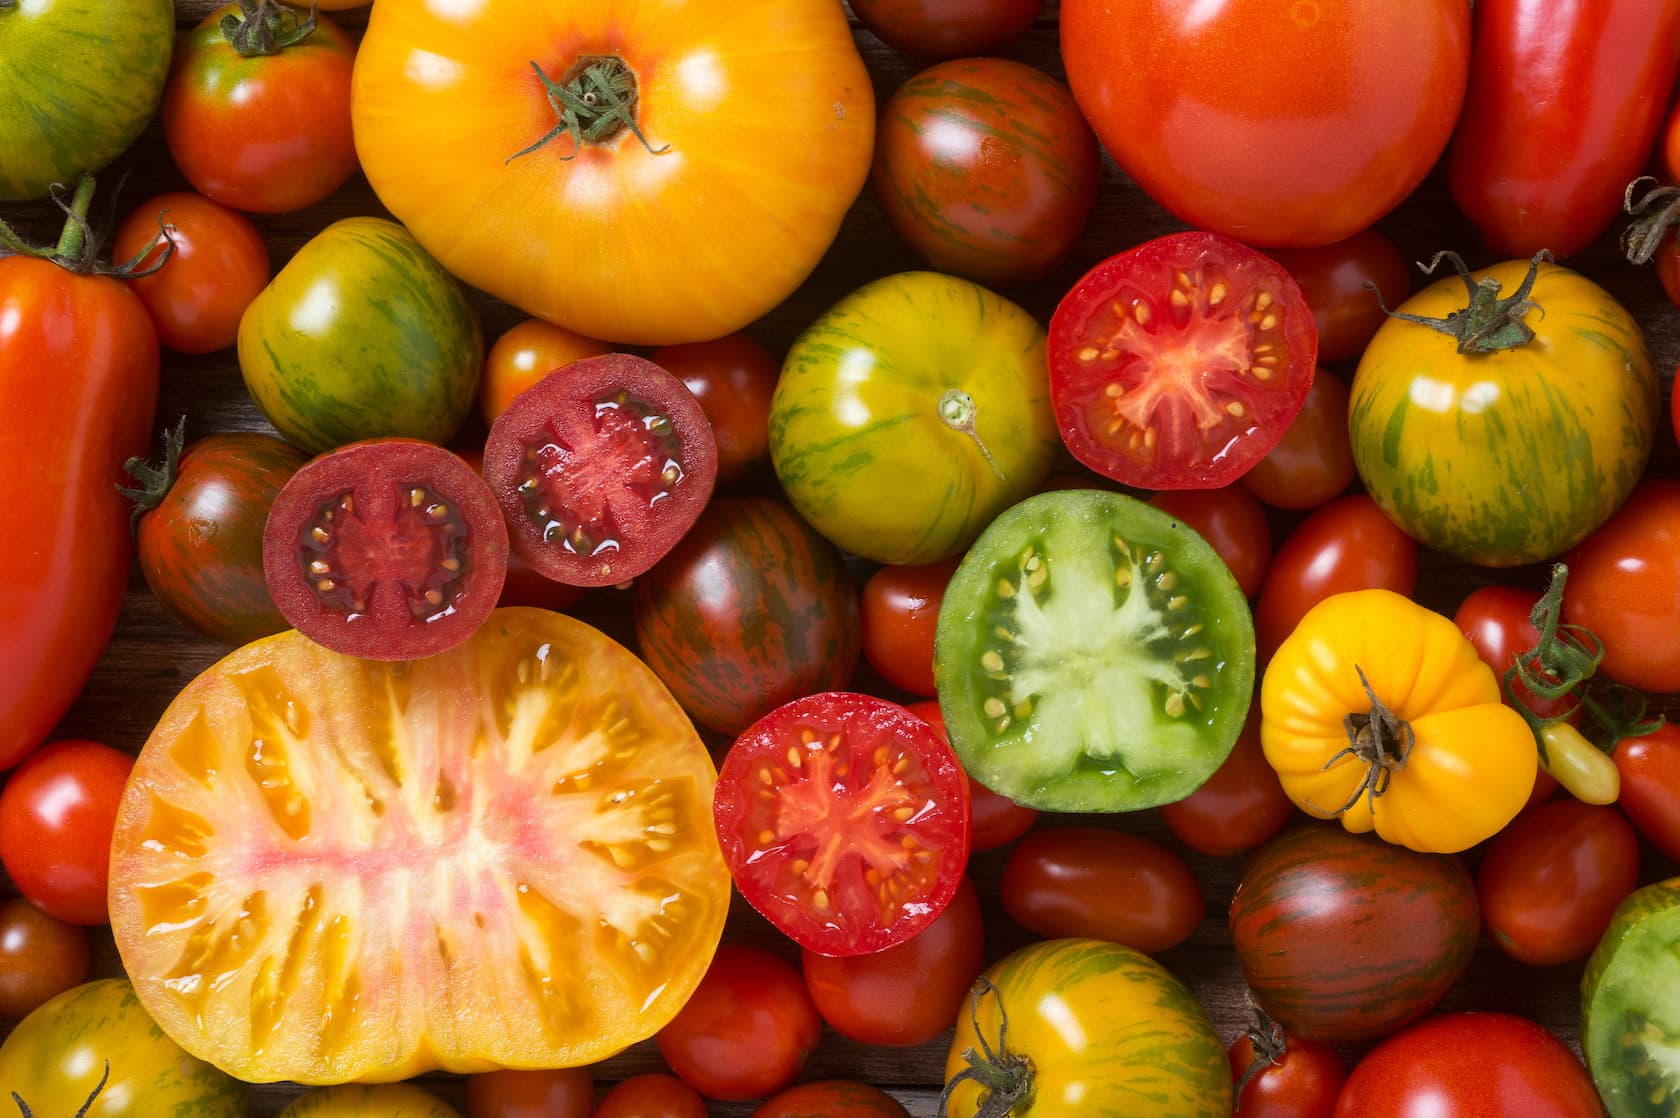 The tomato, a healthy food and perfect for summer